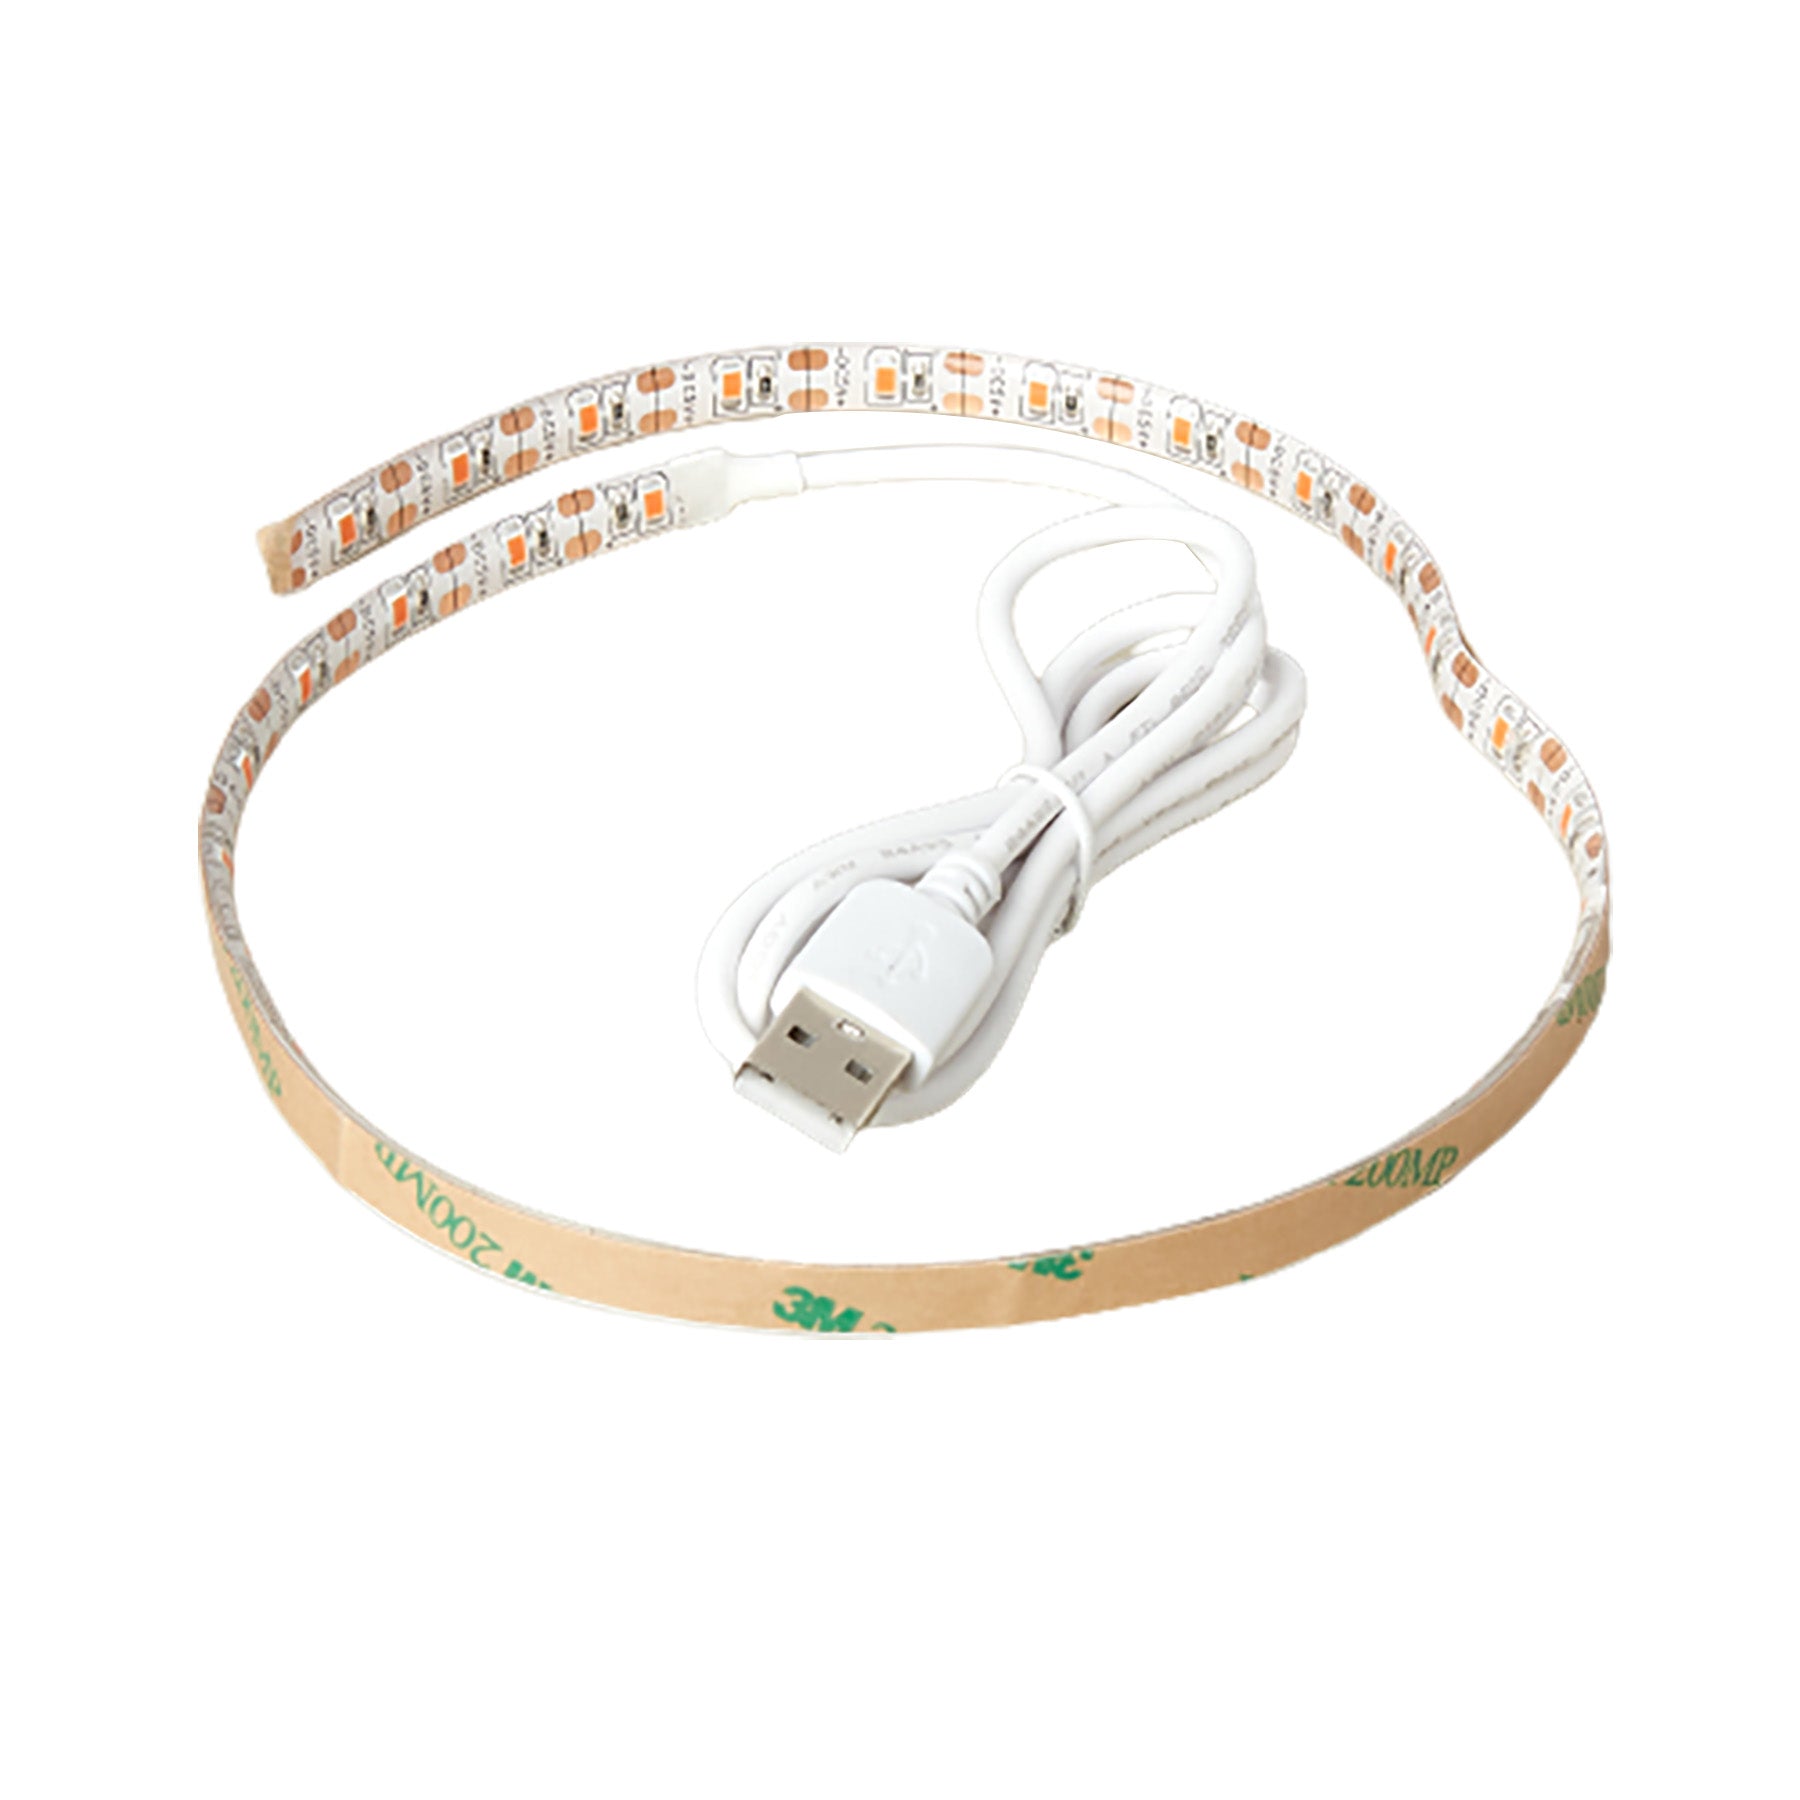 A LED strip with a USB cord attached to it for optimal lighting.